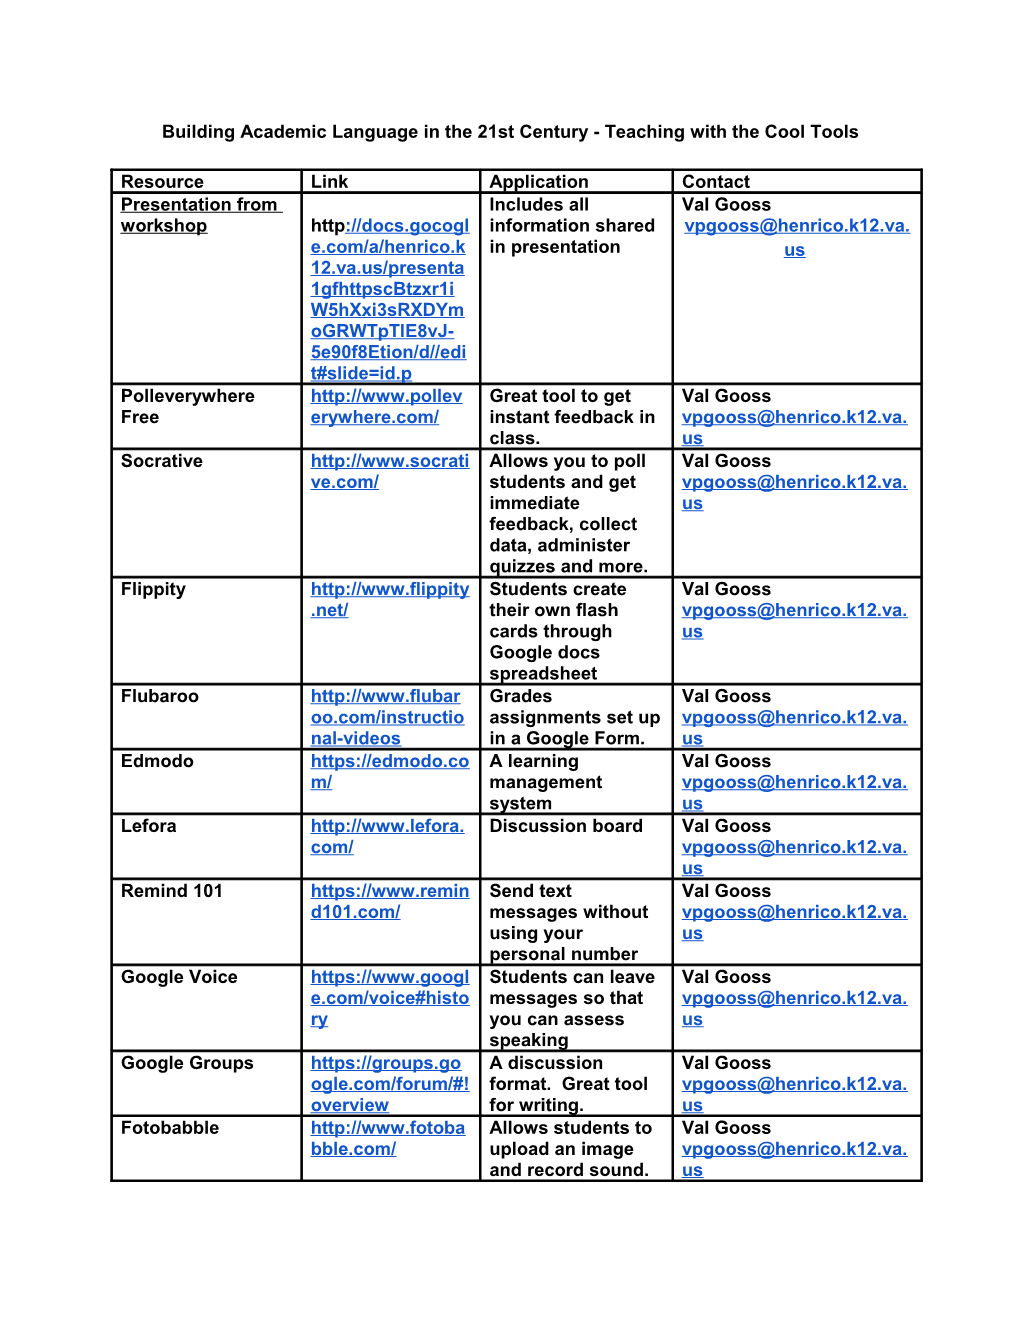 2014 - Technology Resources for Els